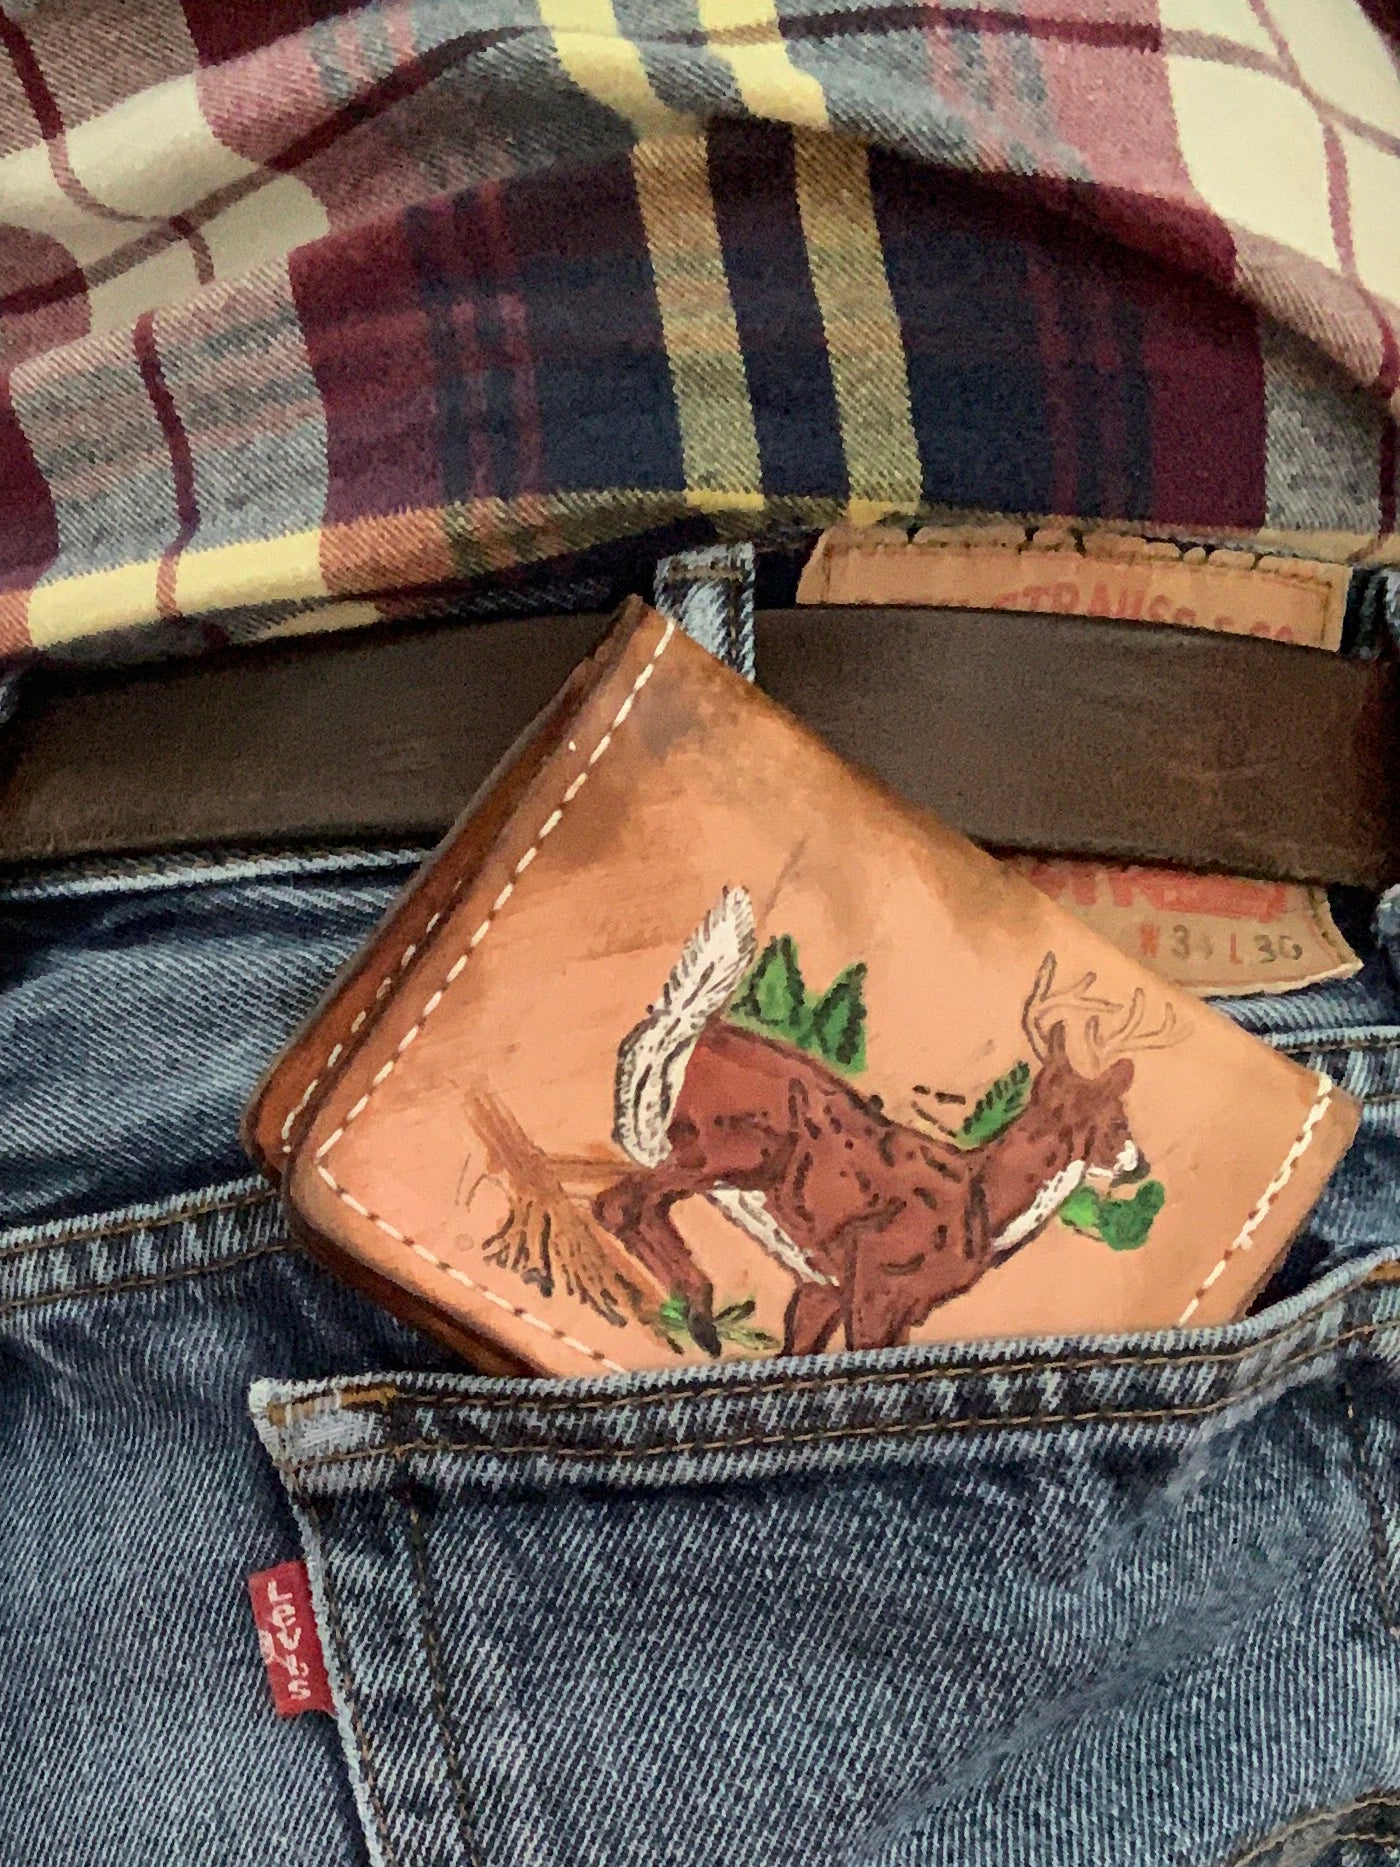 Leather Wallet. Tooled Wallet With Cute Cat. Carved Custom 